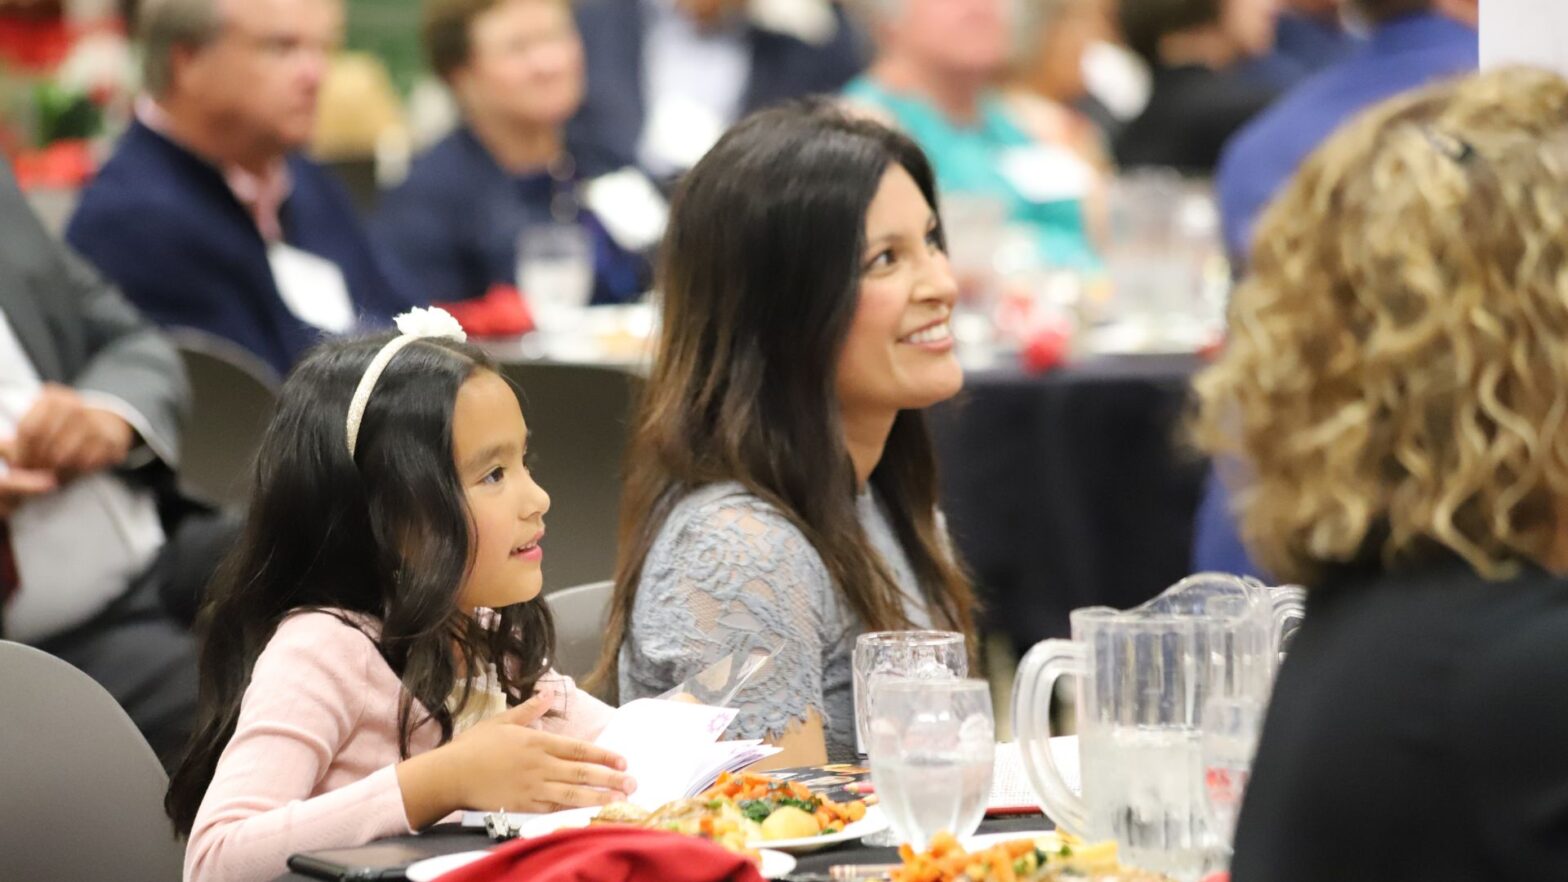 Kristopher Gupilan's family at the Newman Legacy Awards